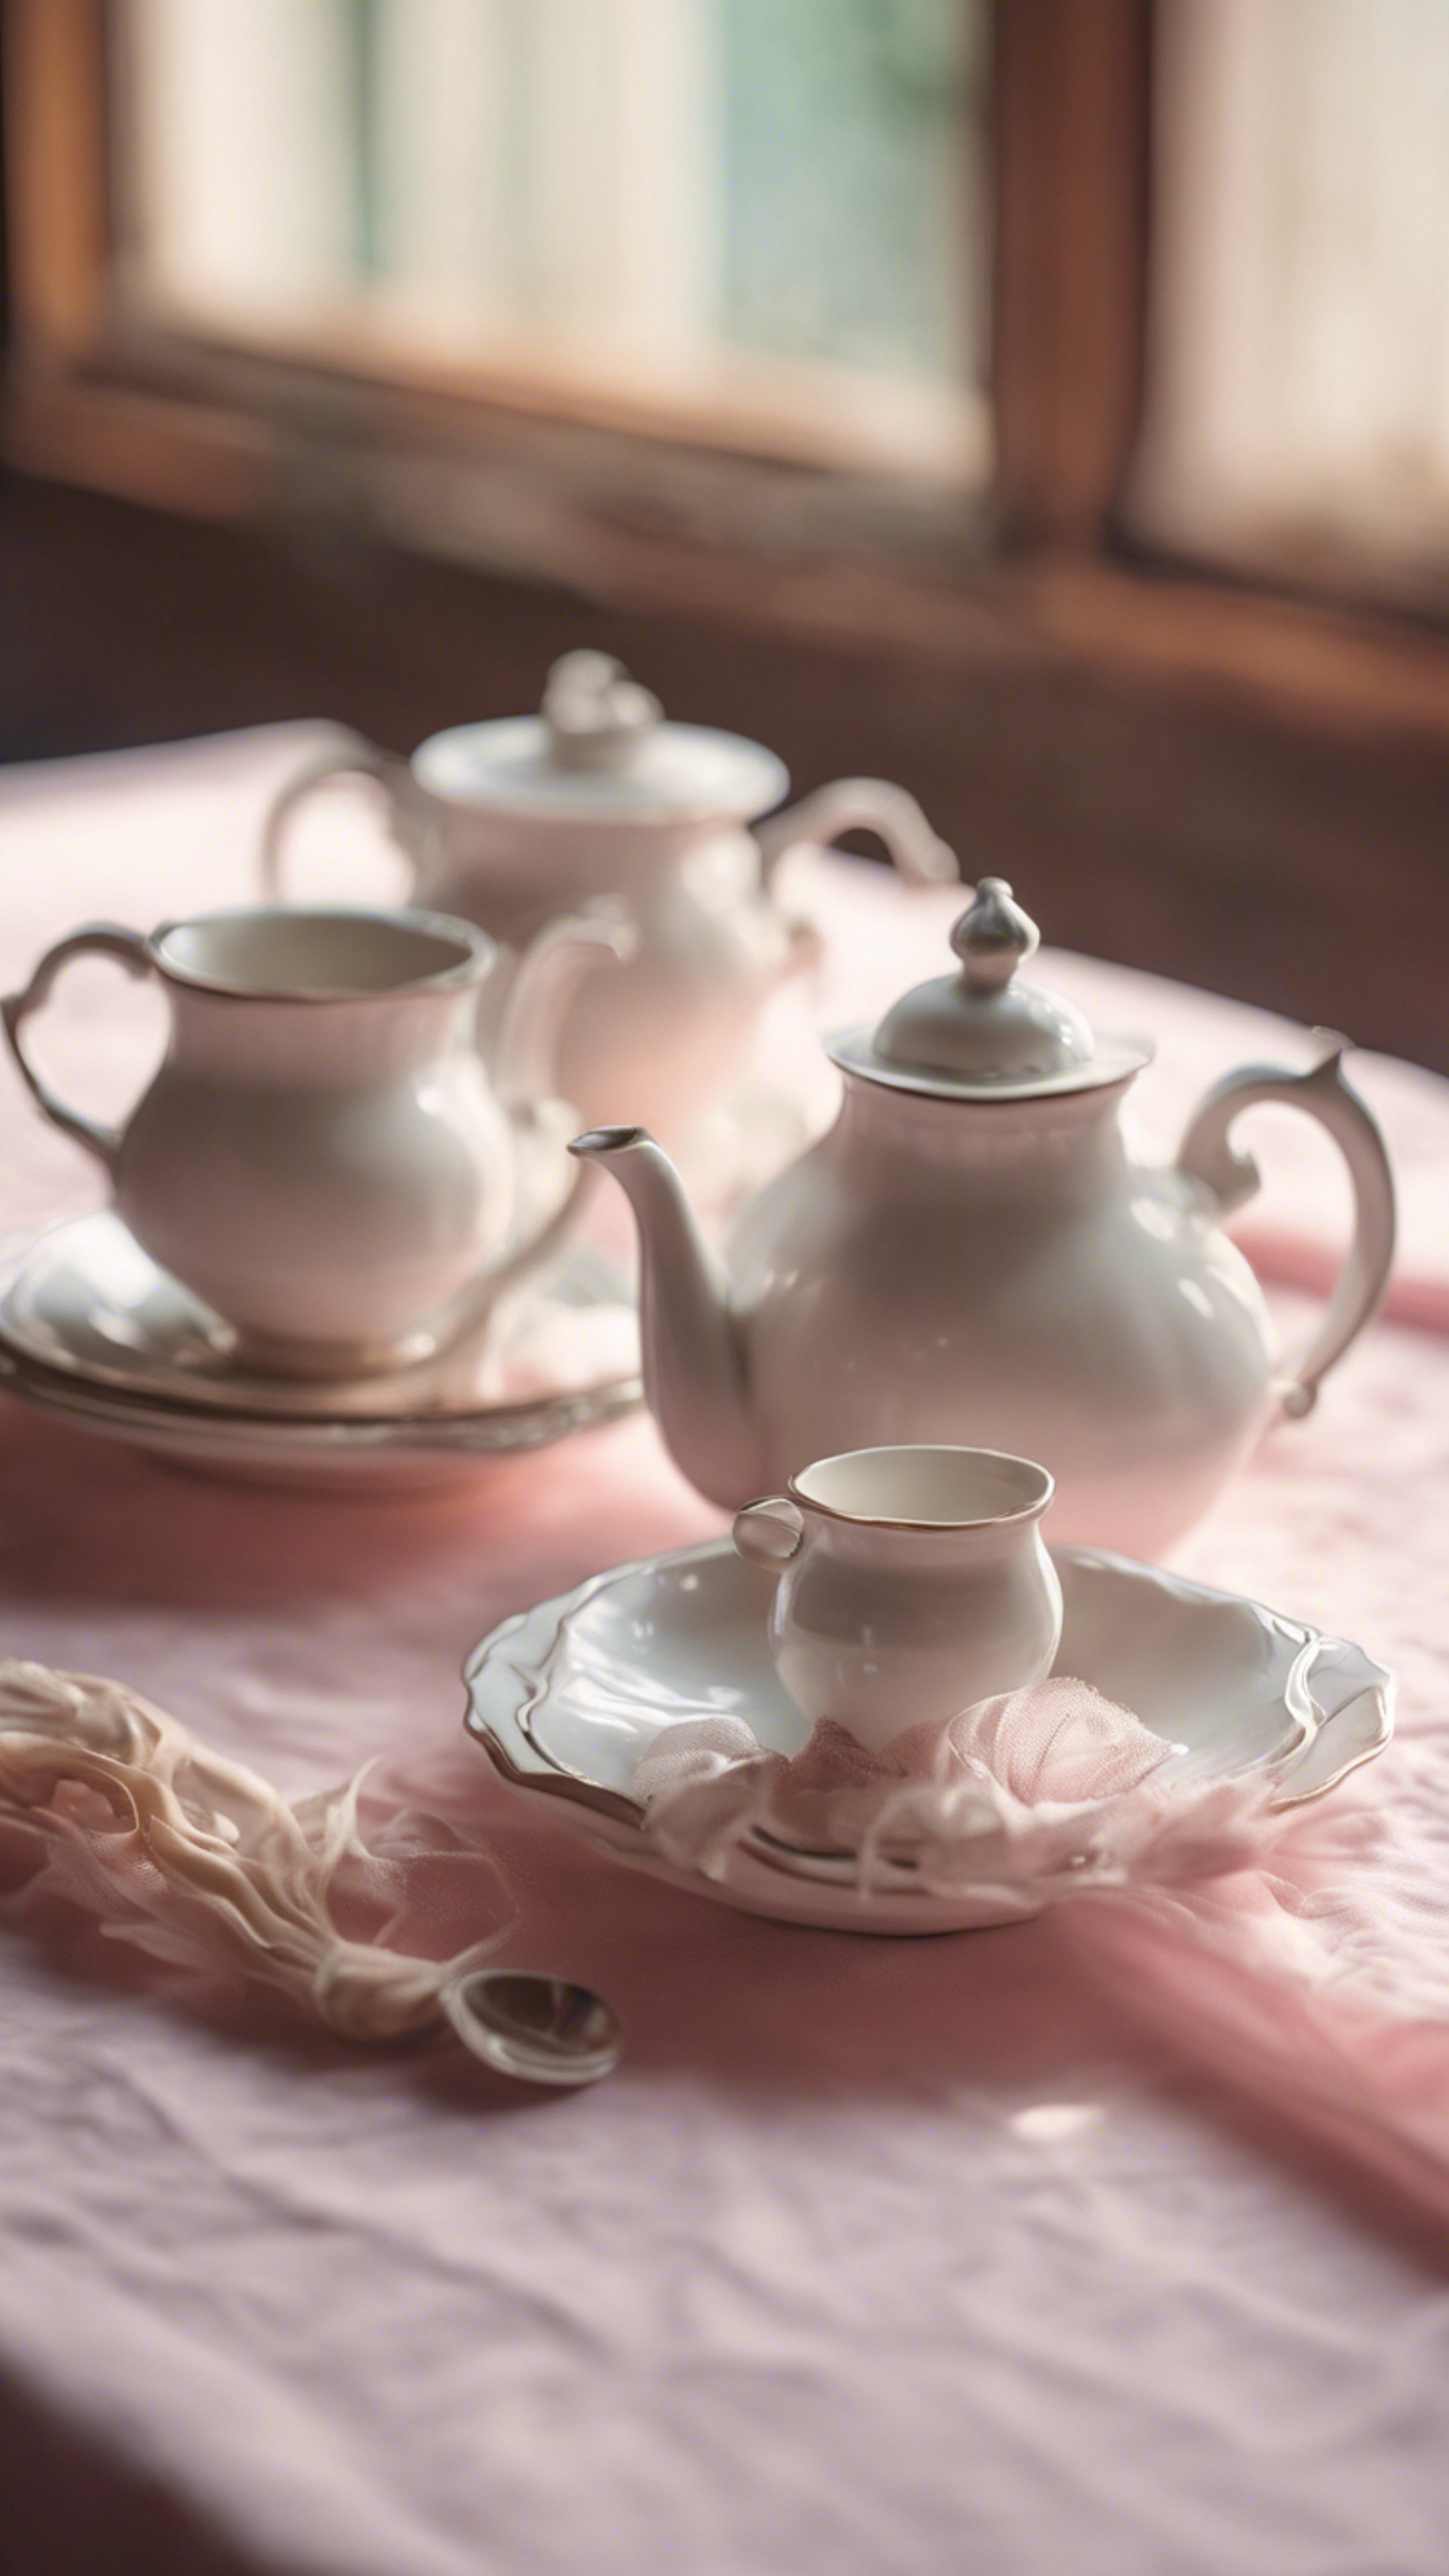 A vintage white tea set, arranged on a fluffy pastel pink tablecloth in a charming, old-world kitchen. Tapet[519305883ddb44018966]